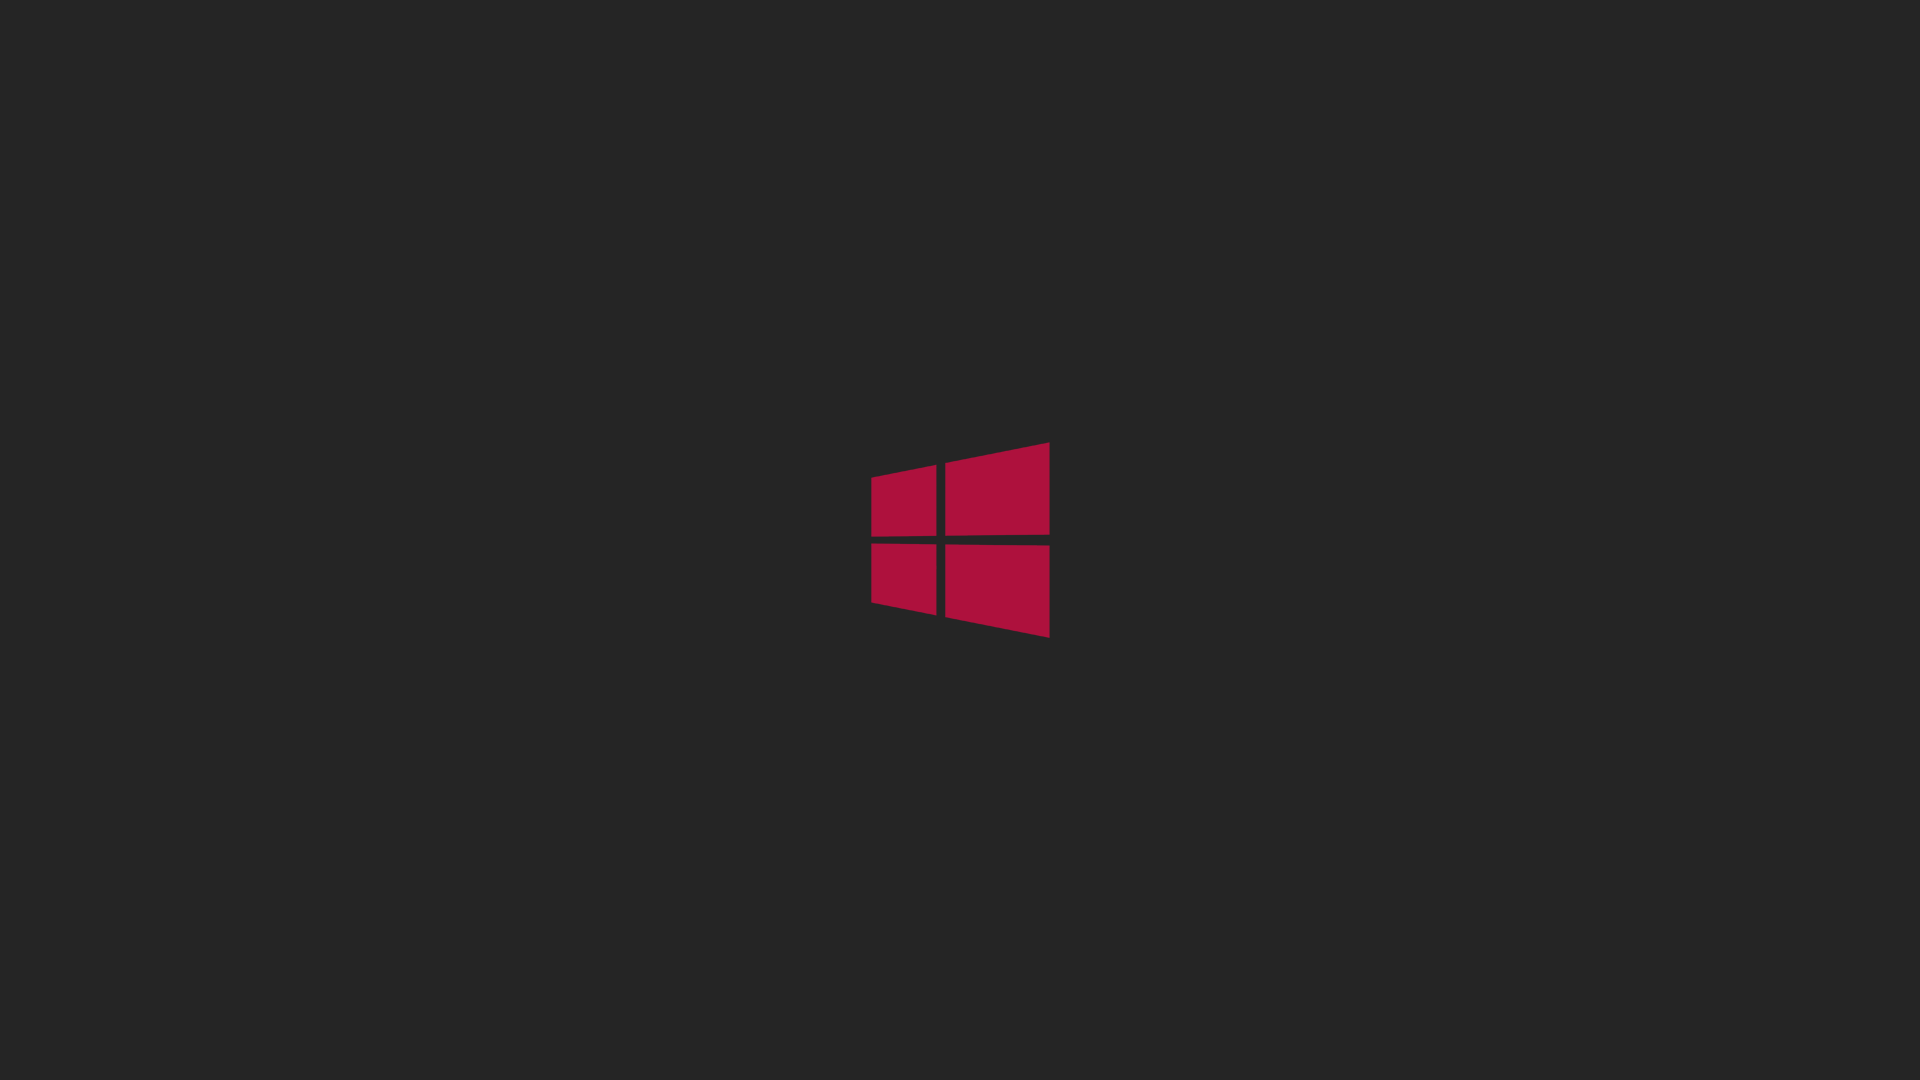 Black Gray and Red Logo - Windows 8 Logo with Red Logo and Black Background